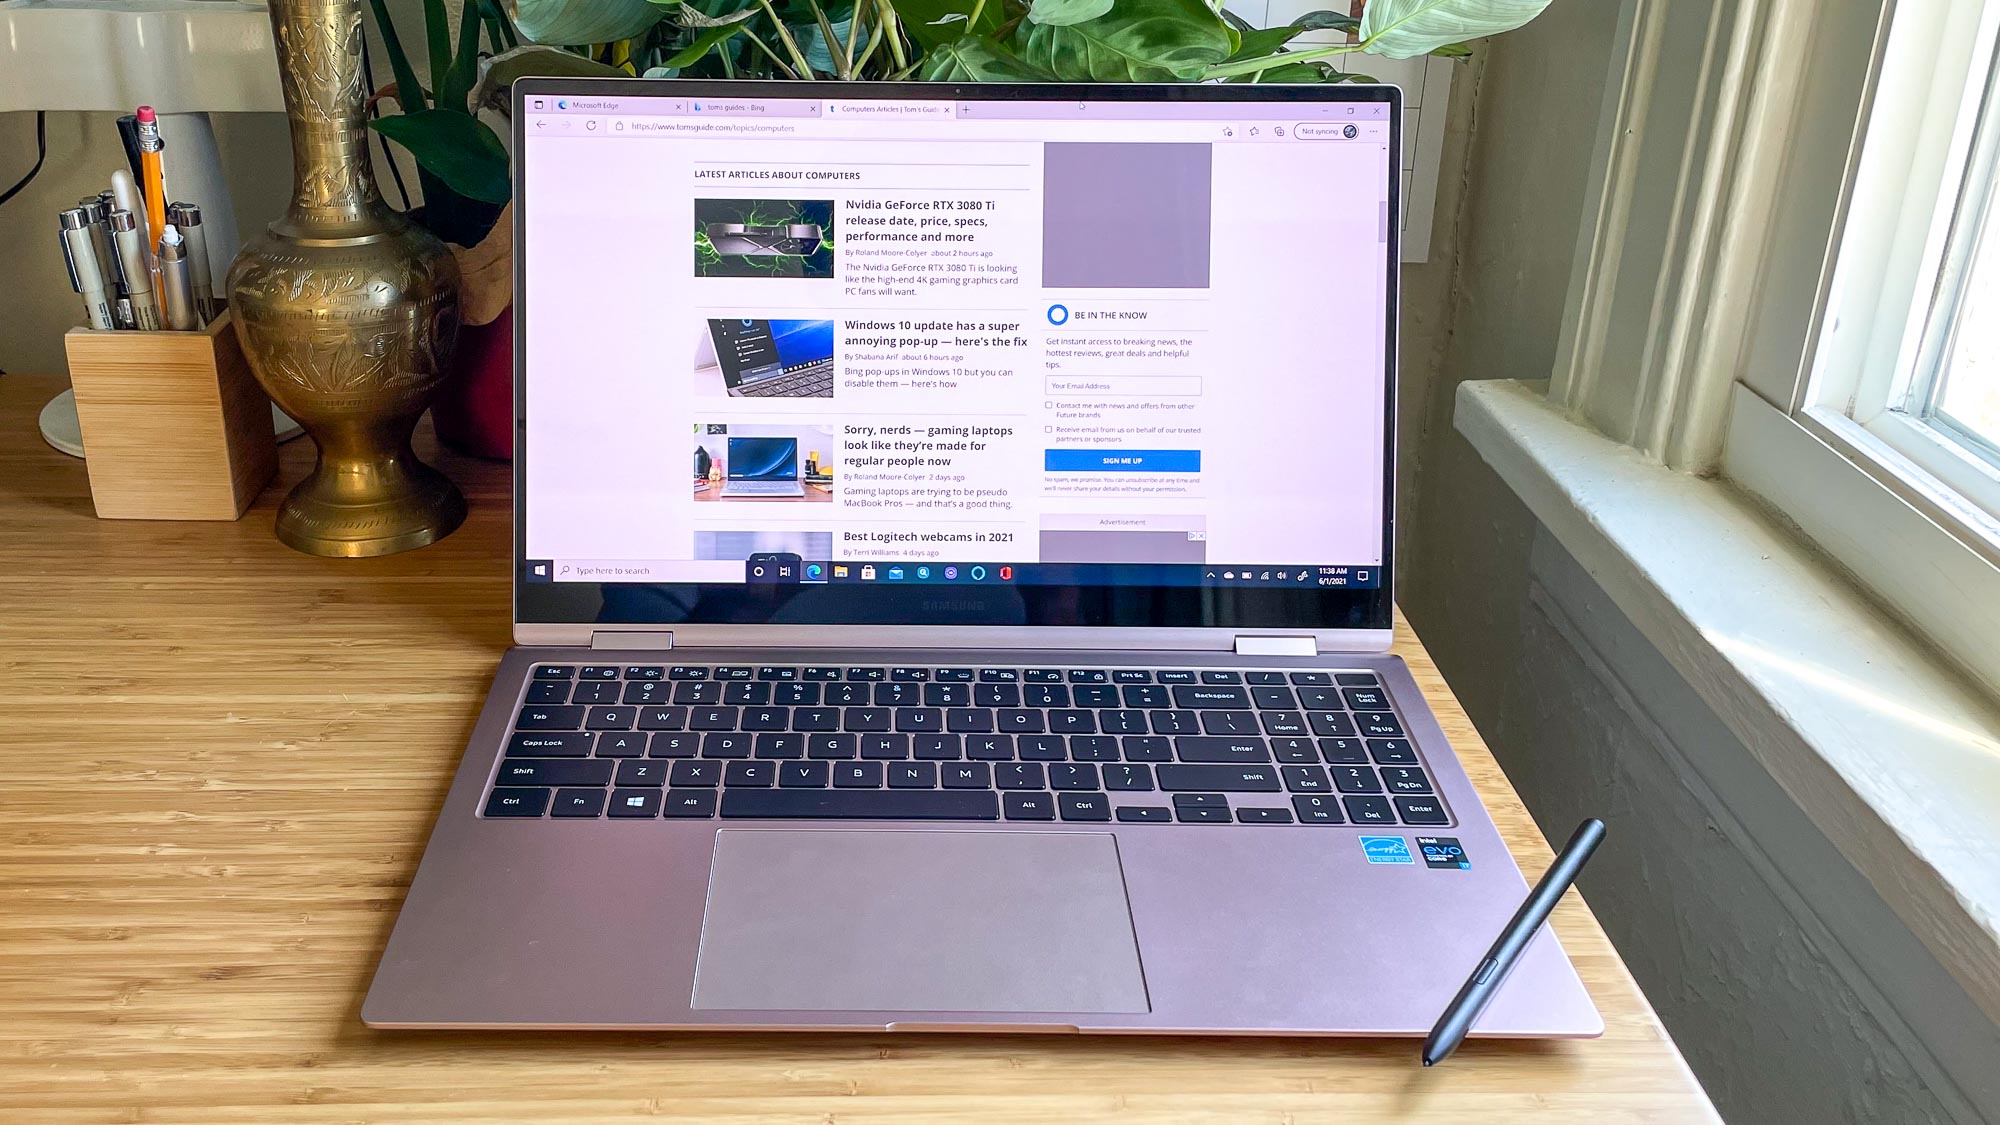 Samsung Galaxy Book Pro 360 review